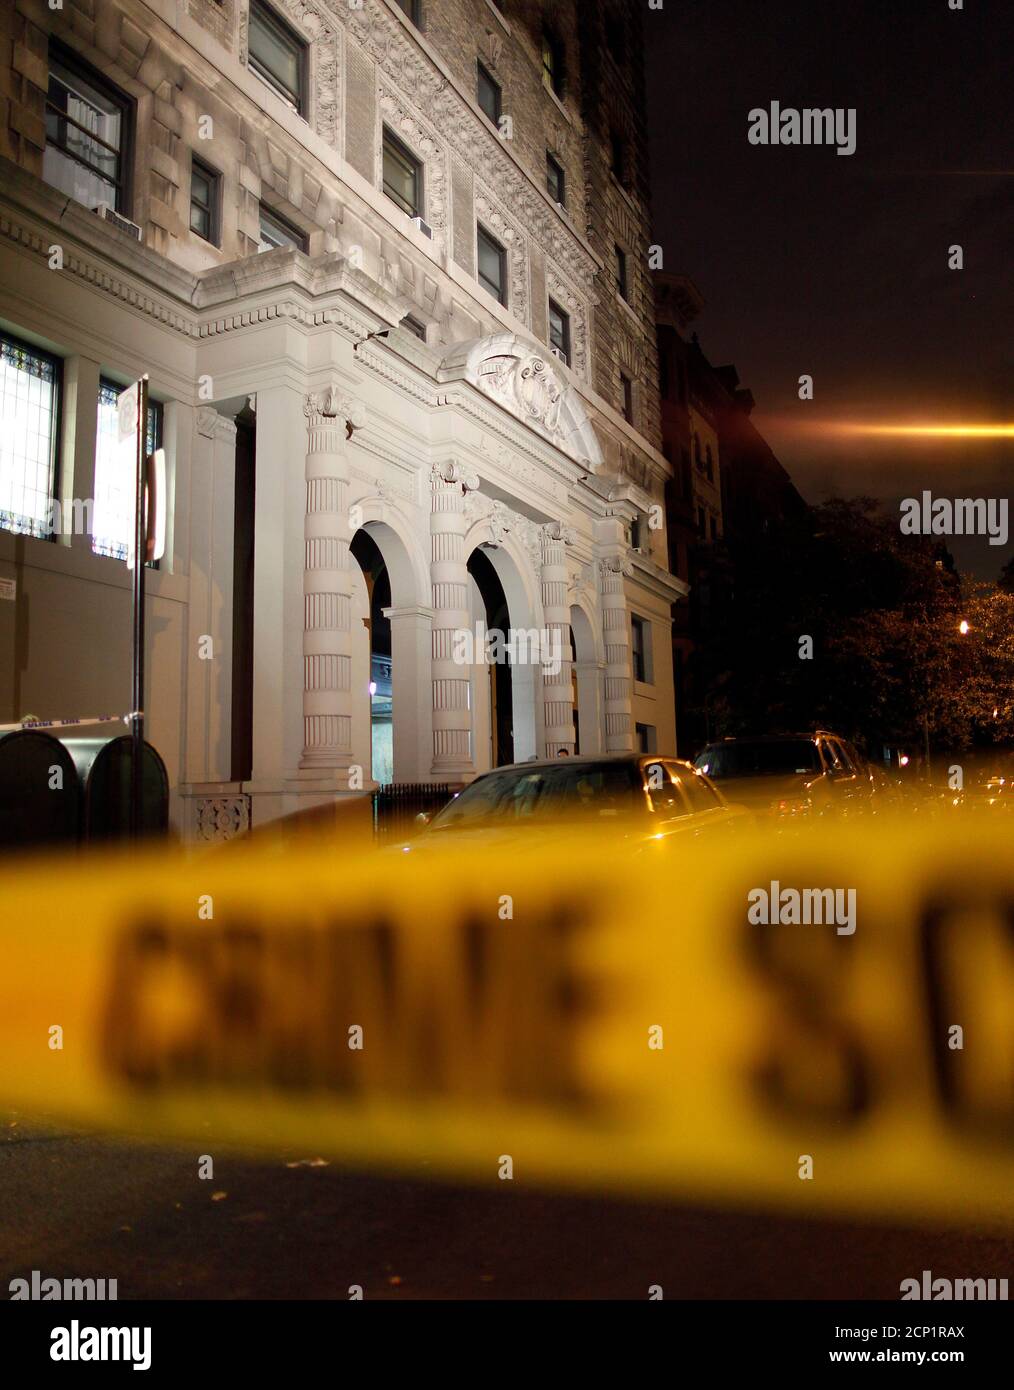 Crime scene tape surrounds a block on 57 West 75th Street in New York October 25, 2012. A mother returned home to her New York City apartment on this street on Thursday to find two of her young children, a boy and a girl, stabbed to death in the bathtub, and the family's nanny was arrested as the suspect in the killings, police said. The boy was believed to be 1 or 2 years old, and a girl about 6 years old, according to New York Police Department spokesman Paul Browne.       REUTERS/Carlo Allegri  (UNITED STATES - Tags: CRIME LAW SOCIETY) Stock Photo